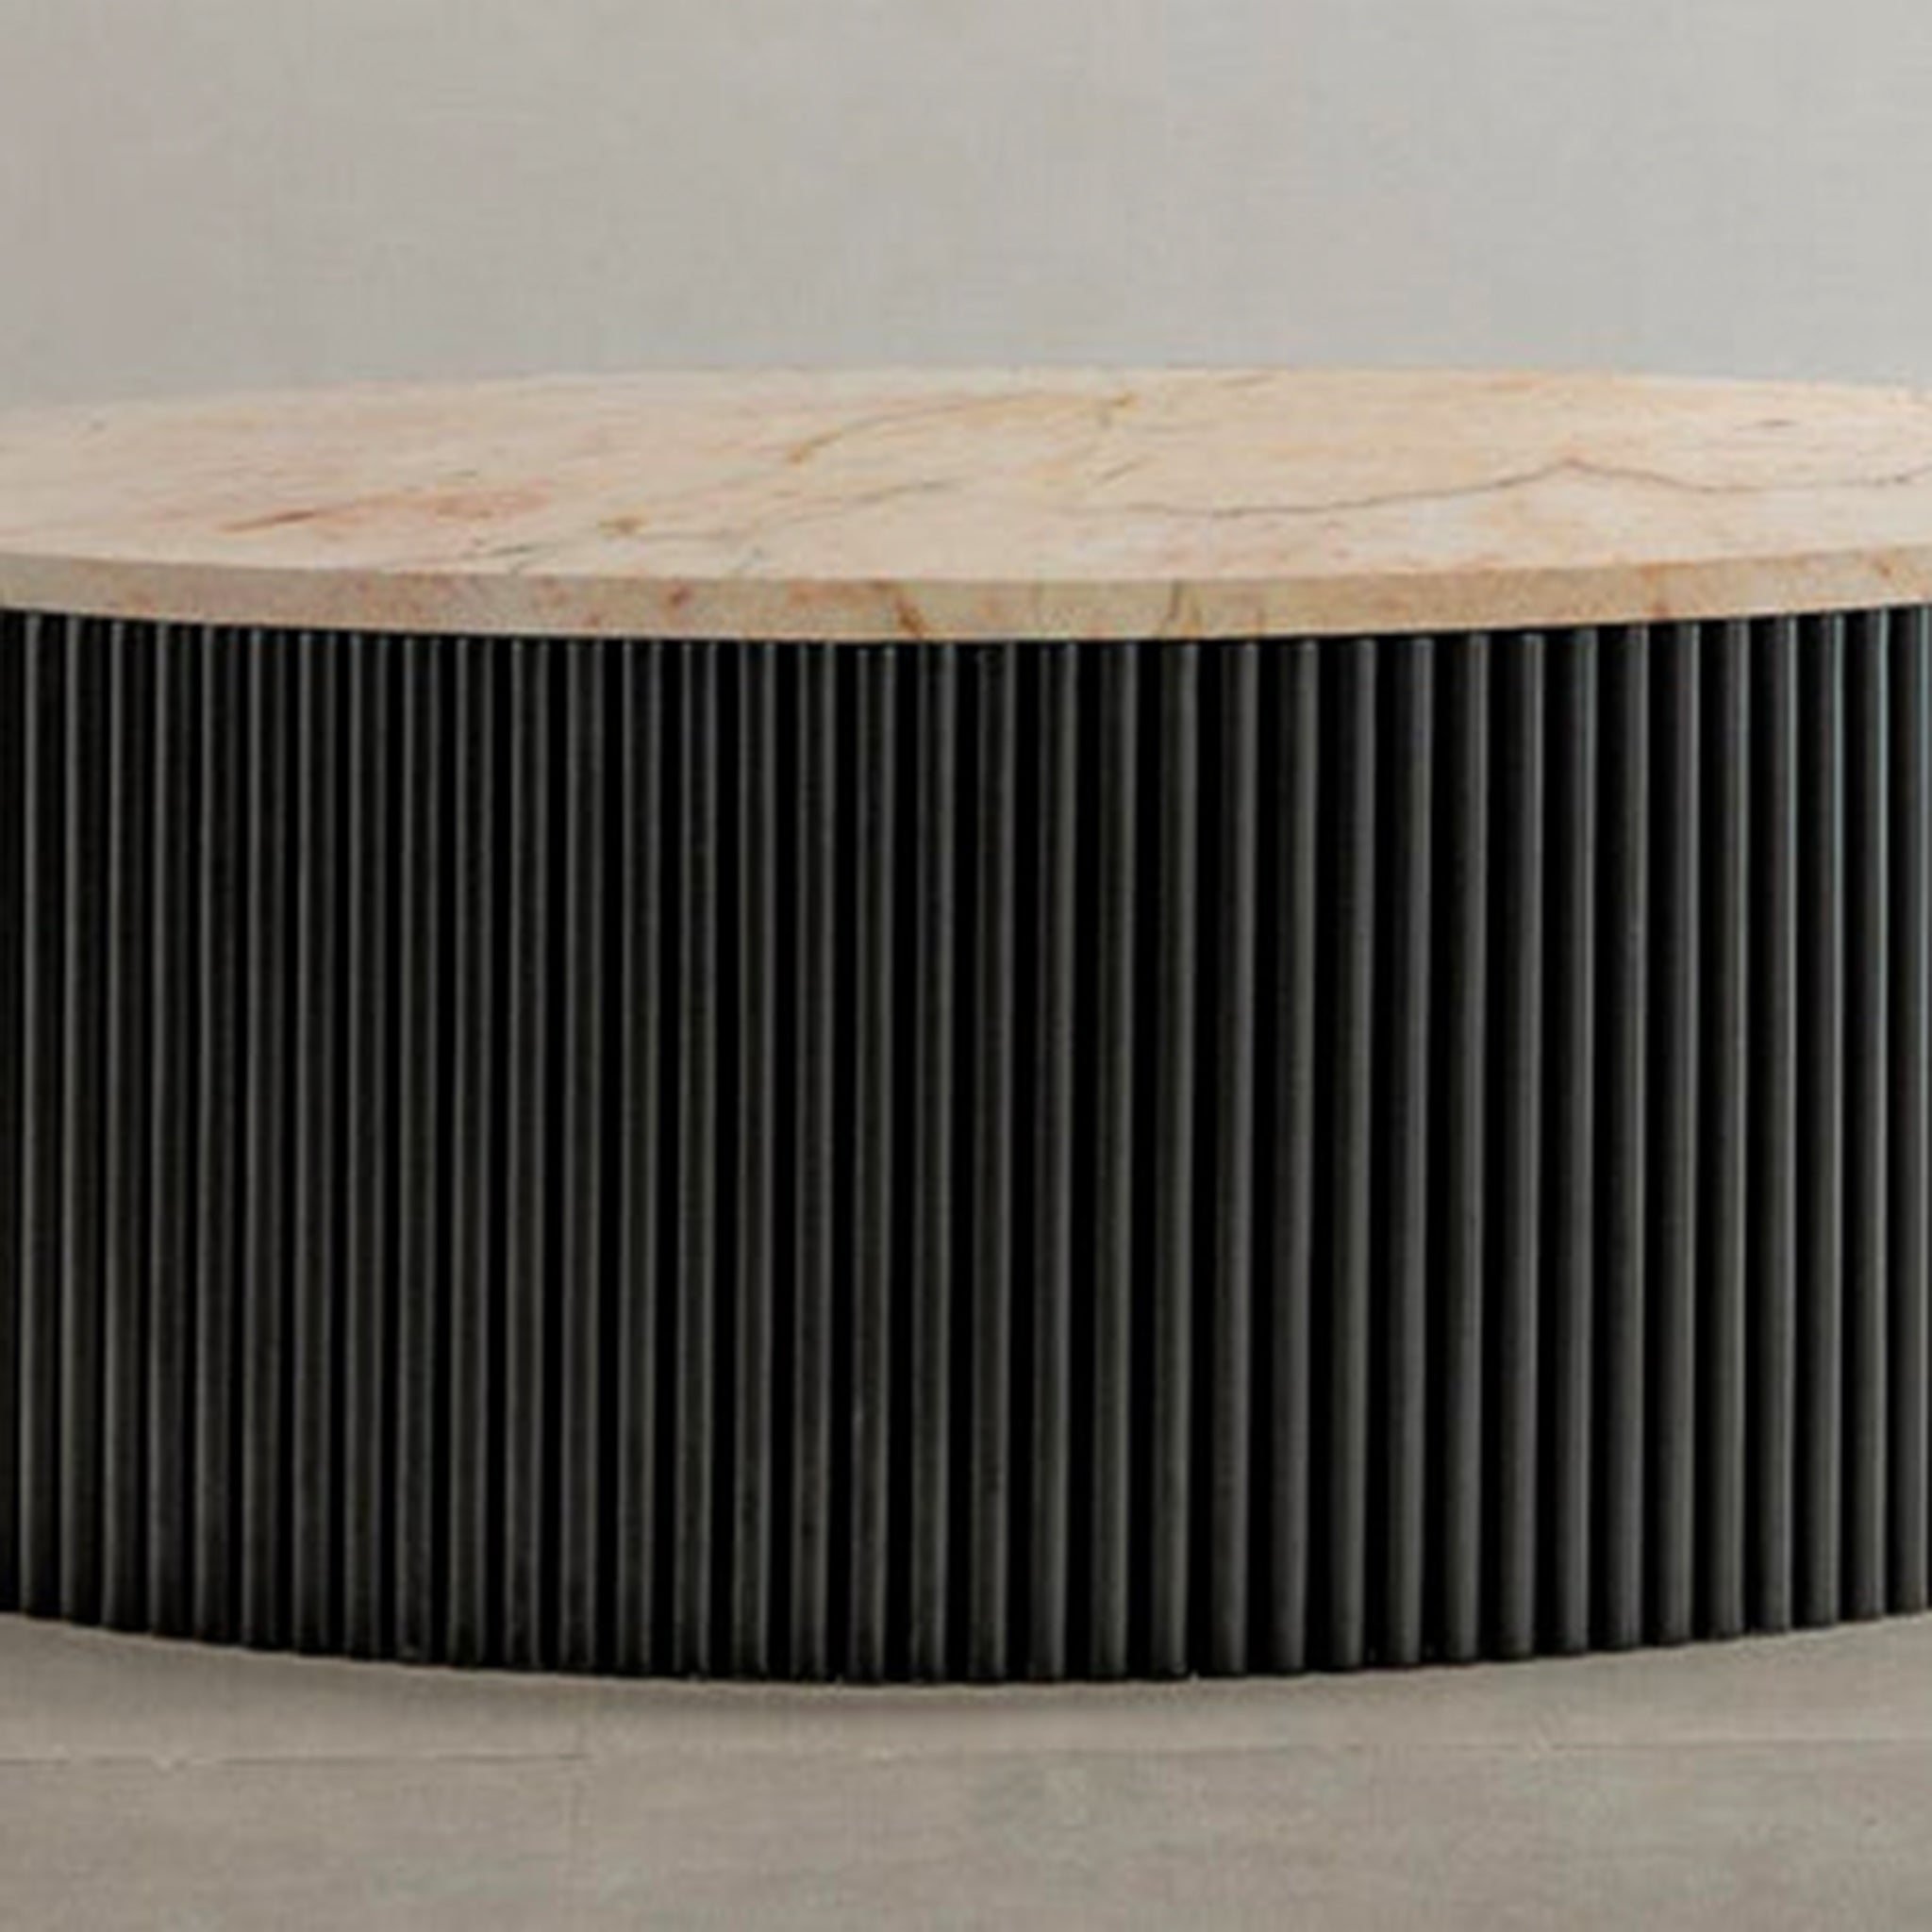 "Stylish coffee table with ribbed exterior and green stone surface"